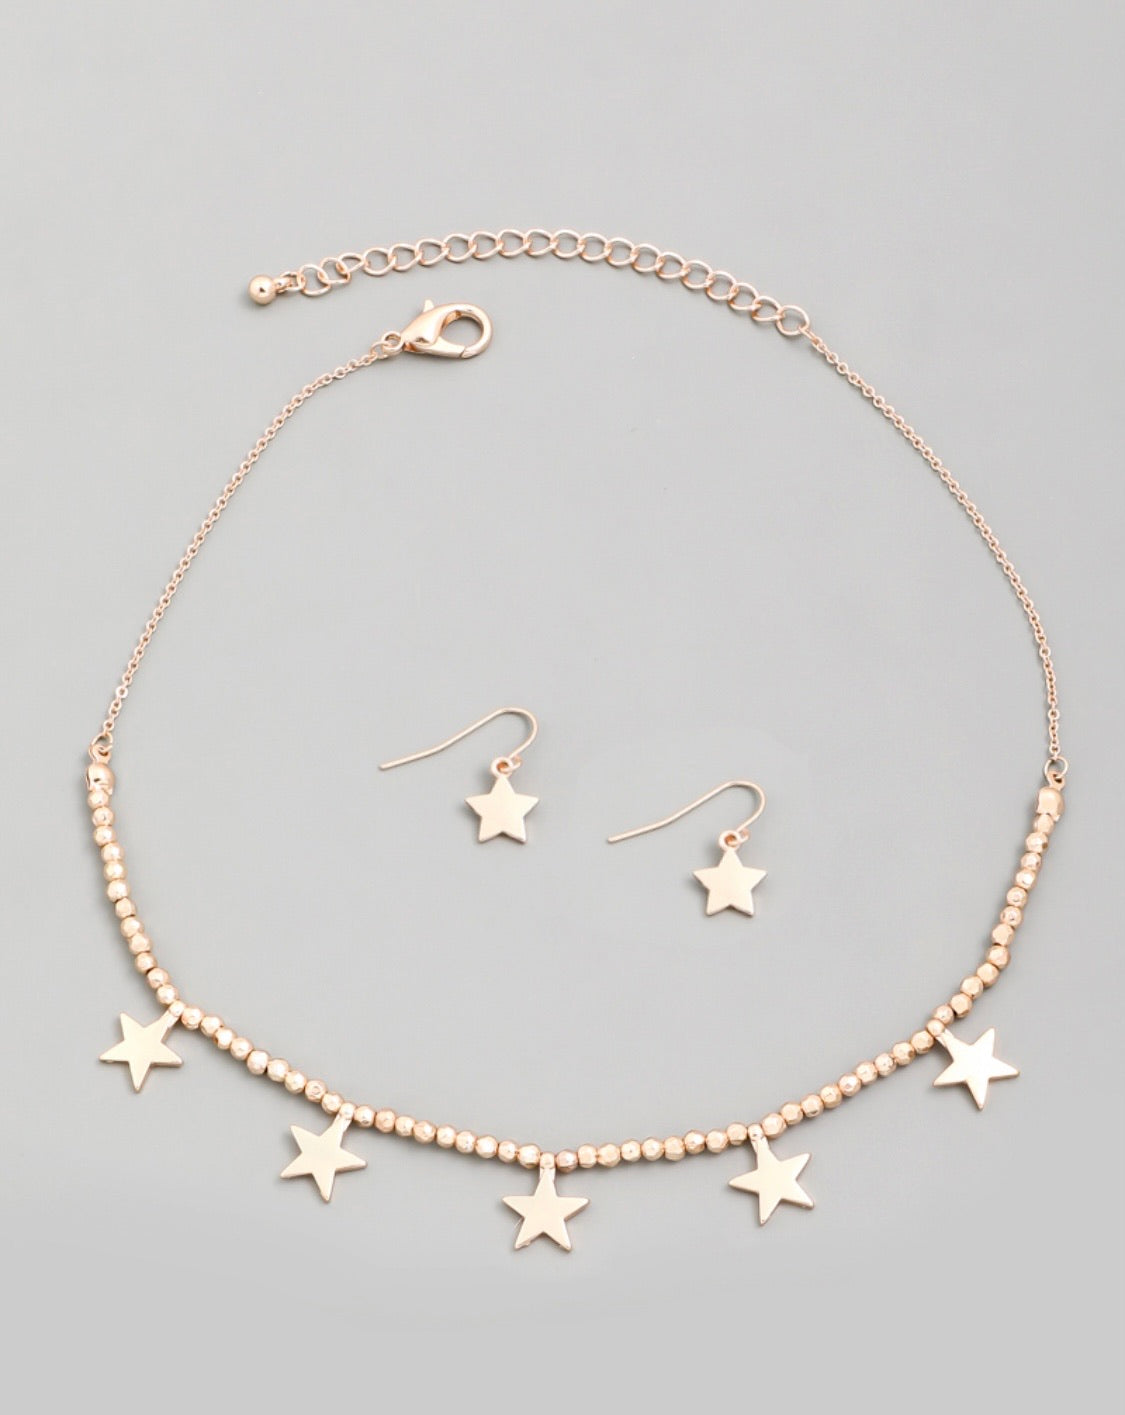 Beaded Star Charm Necklace Set